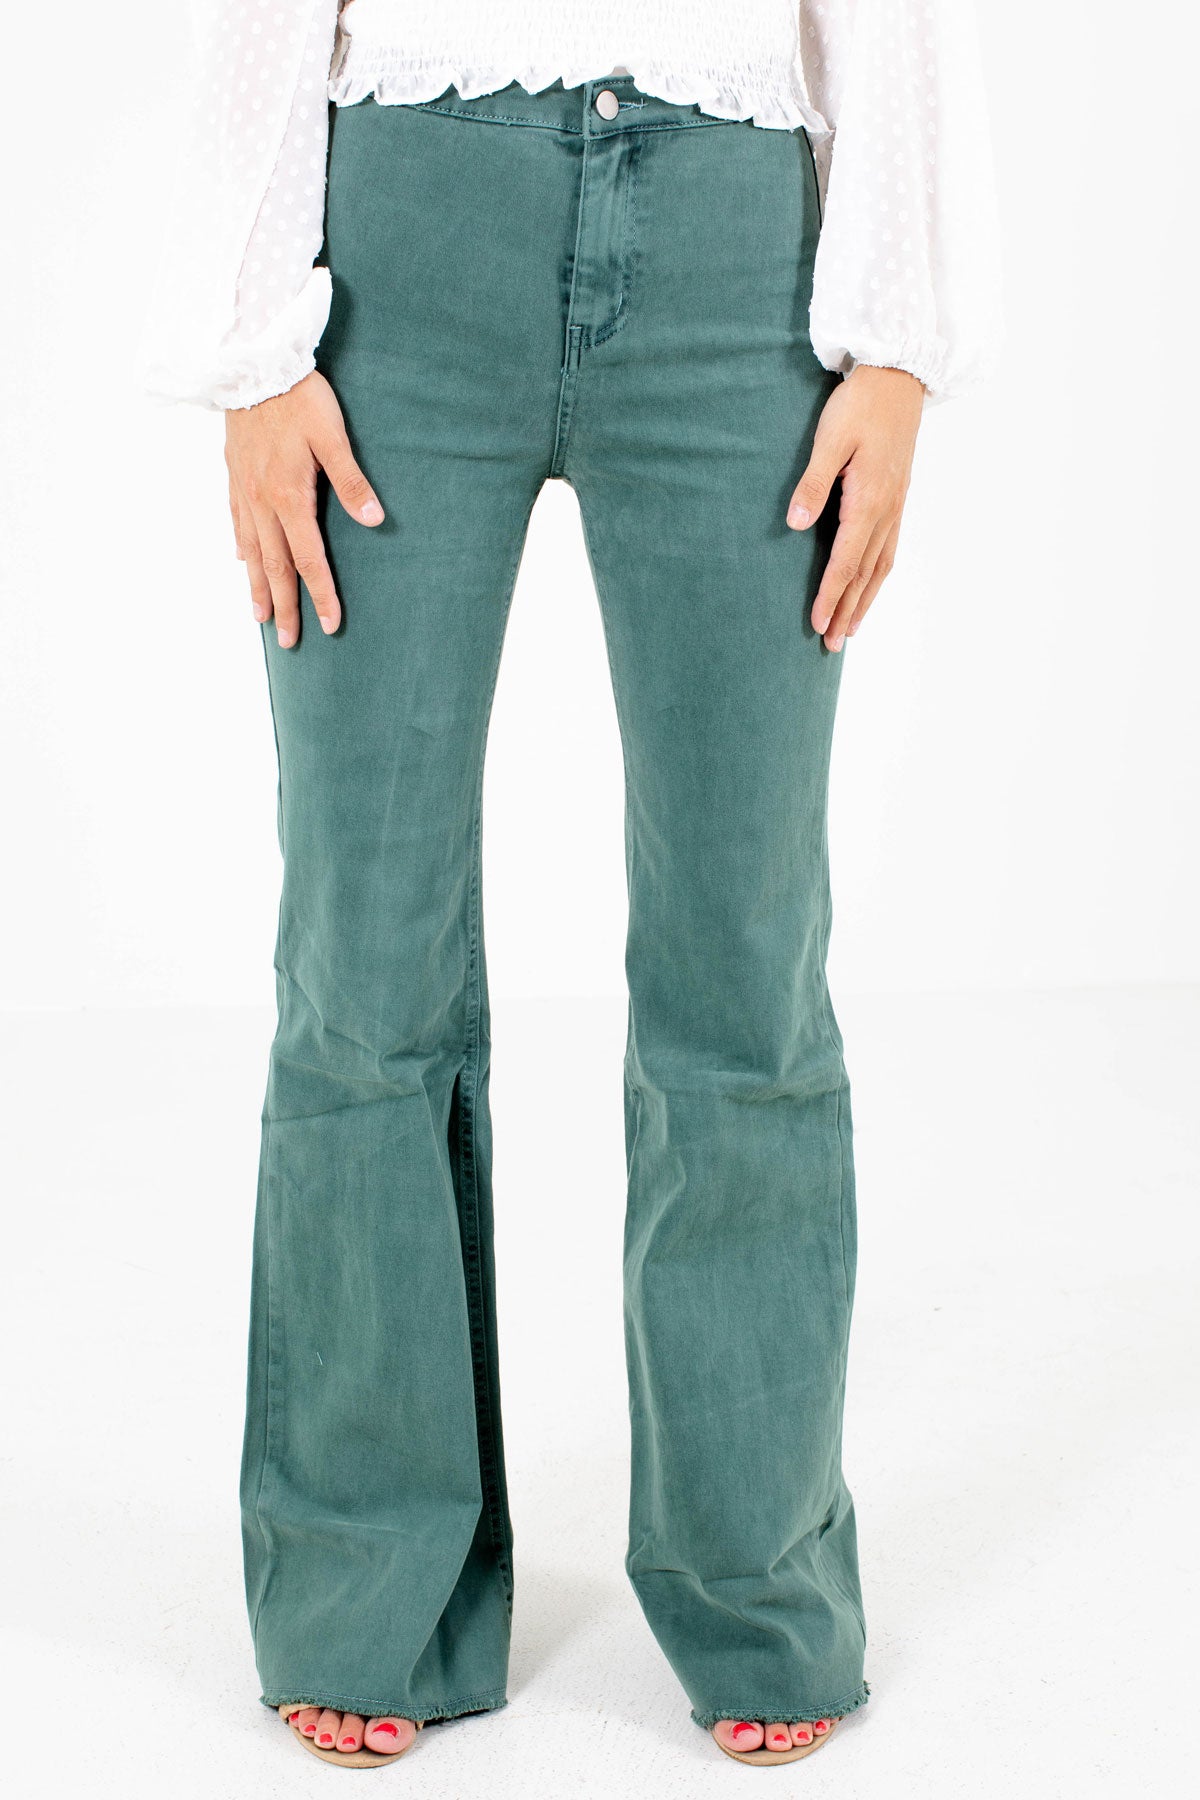 Pine Green Flare Style Boutique Jeans for Women